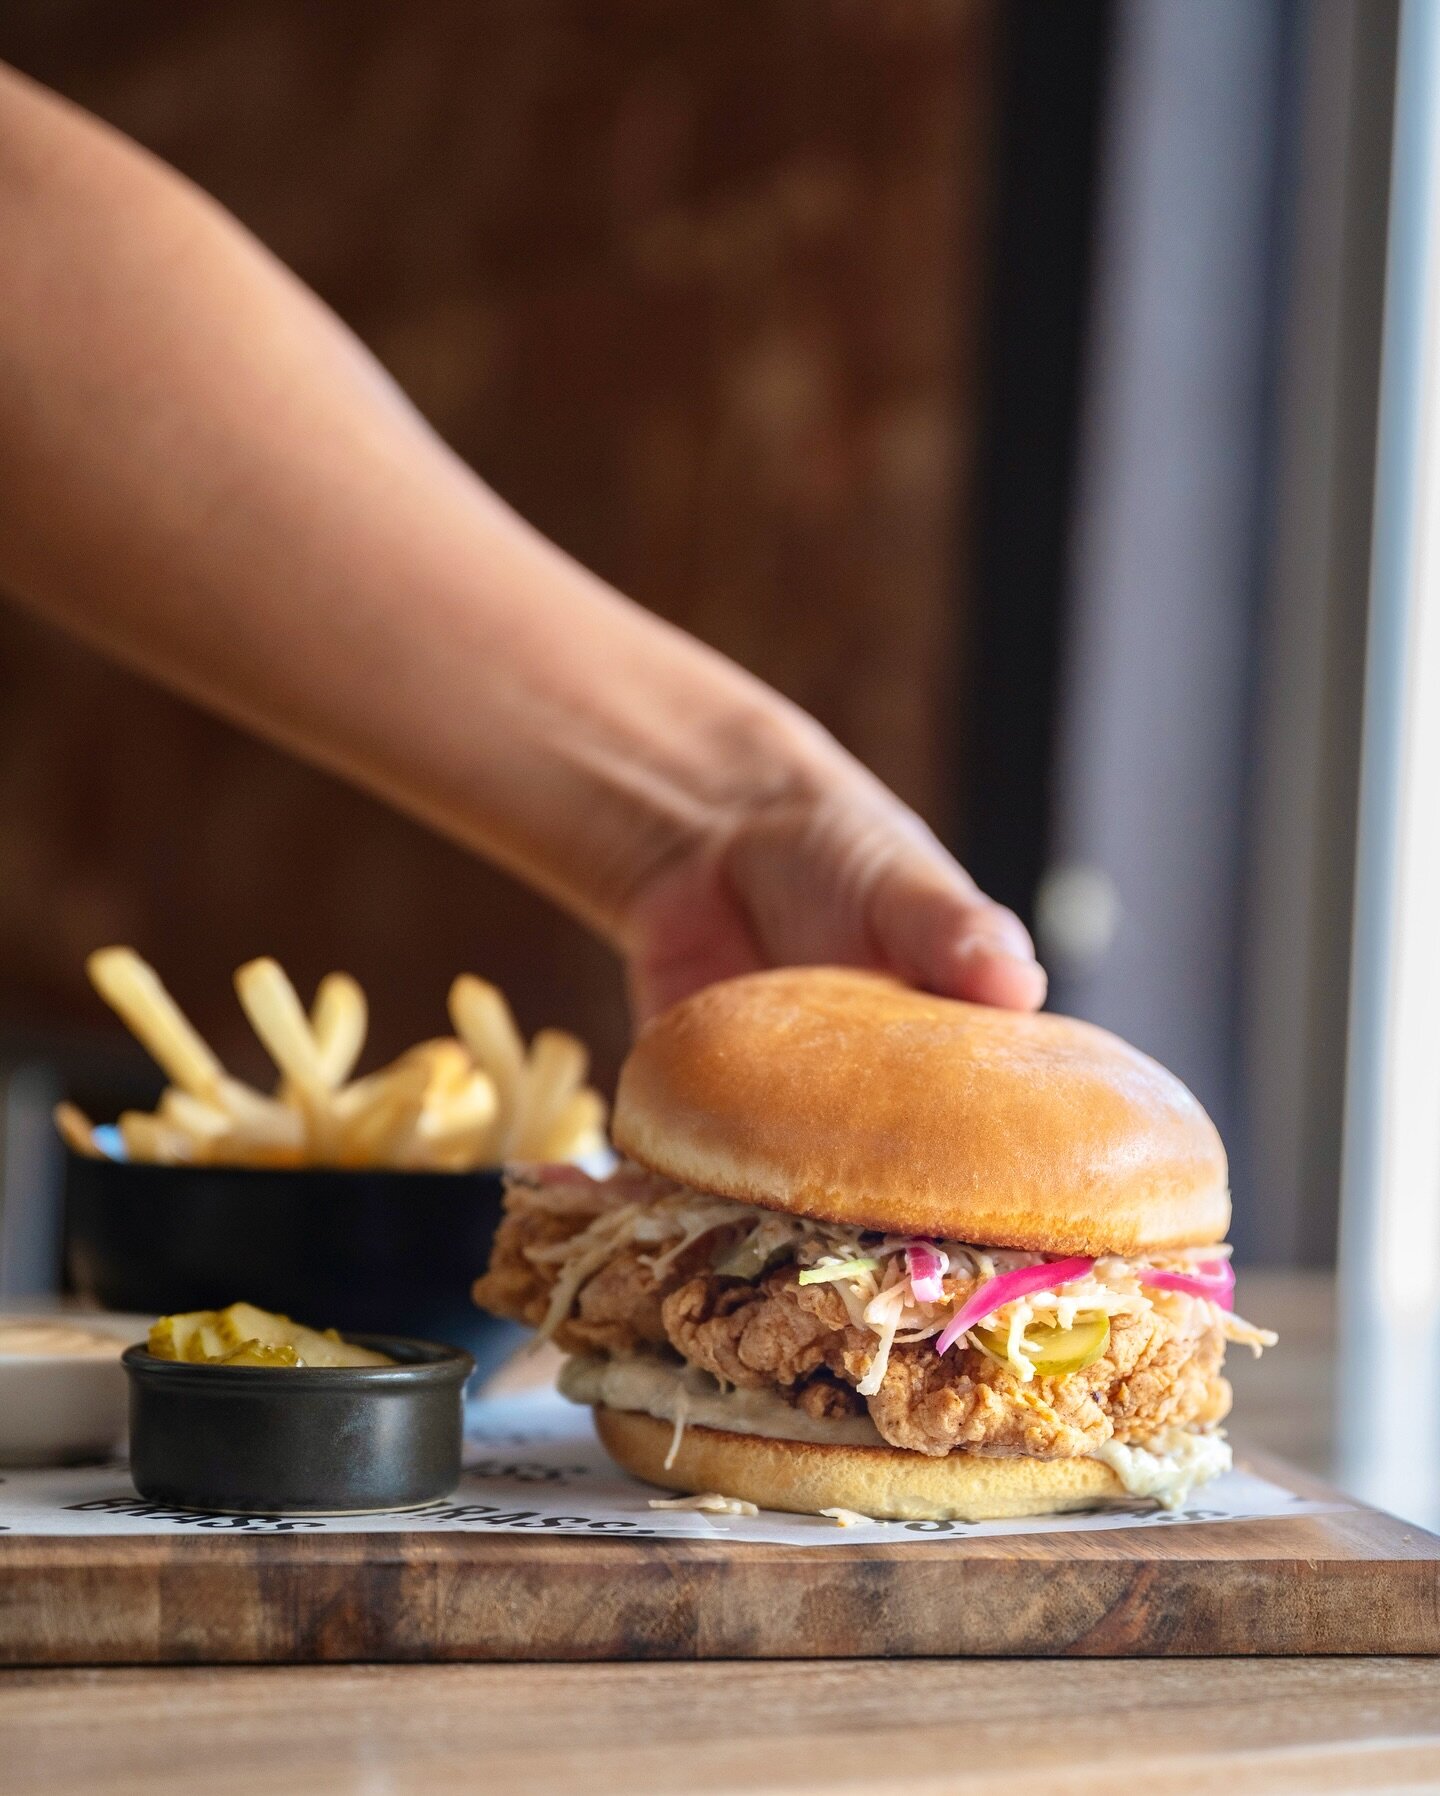 Pointedly delicious and remarkably moist. Our new chicken burger gets its verve from the dill pickle brine which seasons and moistens the chicken from the inside-out. Add the extra pickles for some zip to the slaw and you have an ultimate n.y inspire